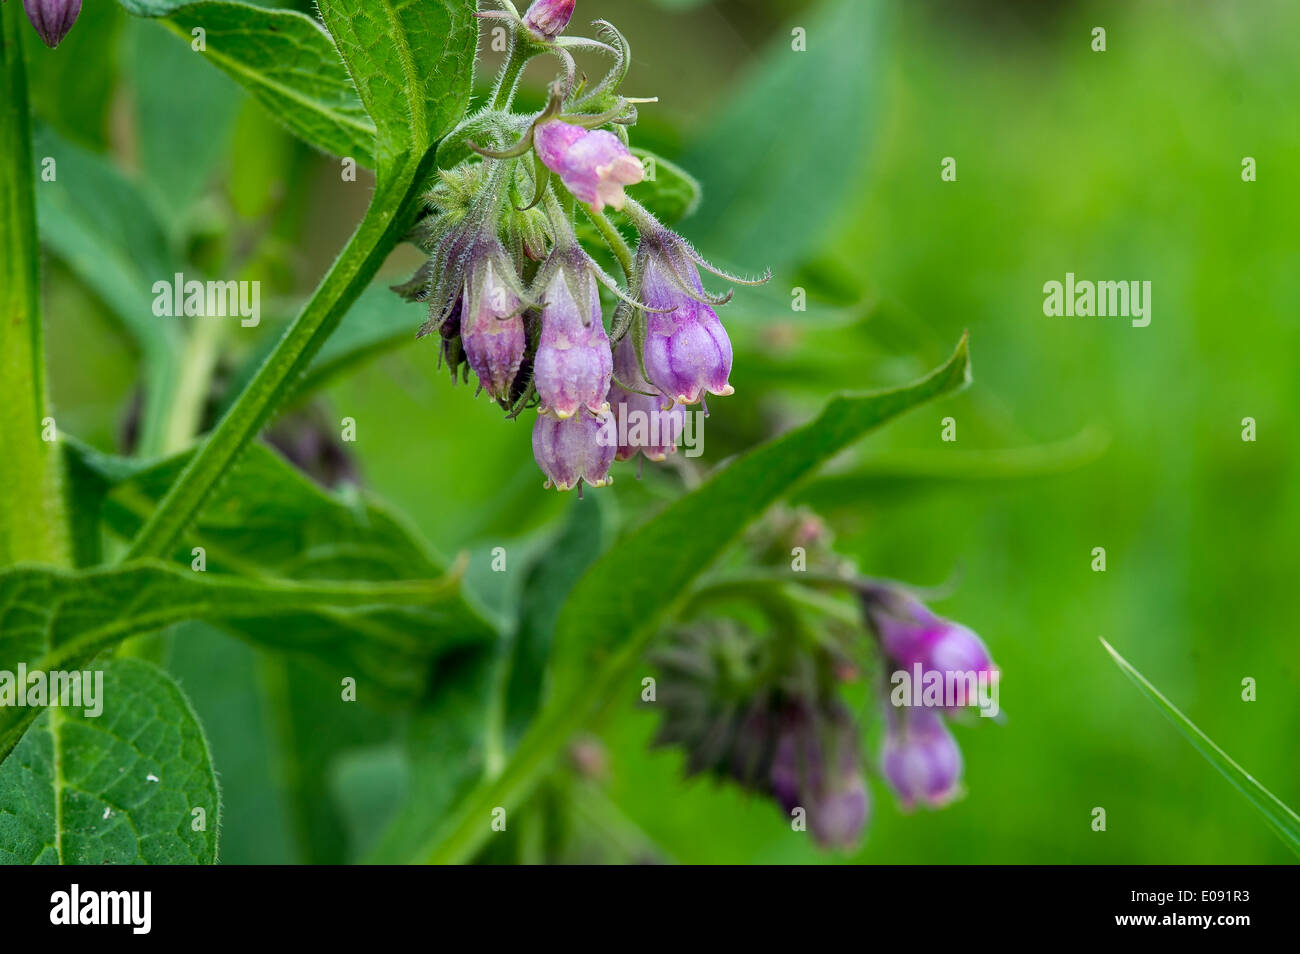 Red Dead Nettle, Rote Taubnessel,,Blume,Flower, Stock Photo